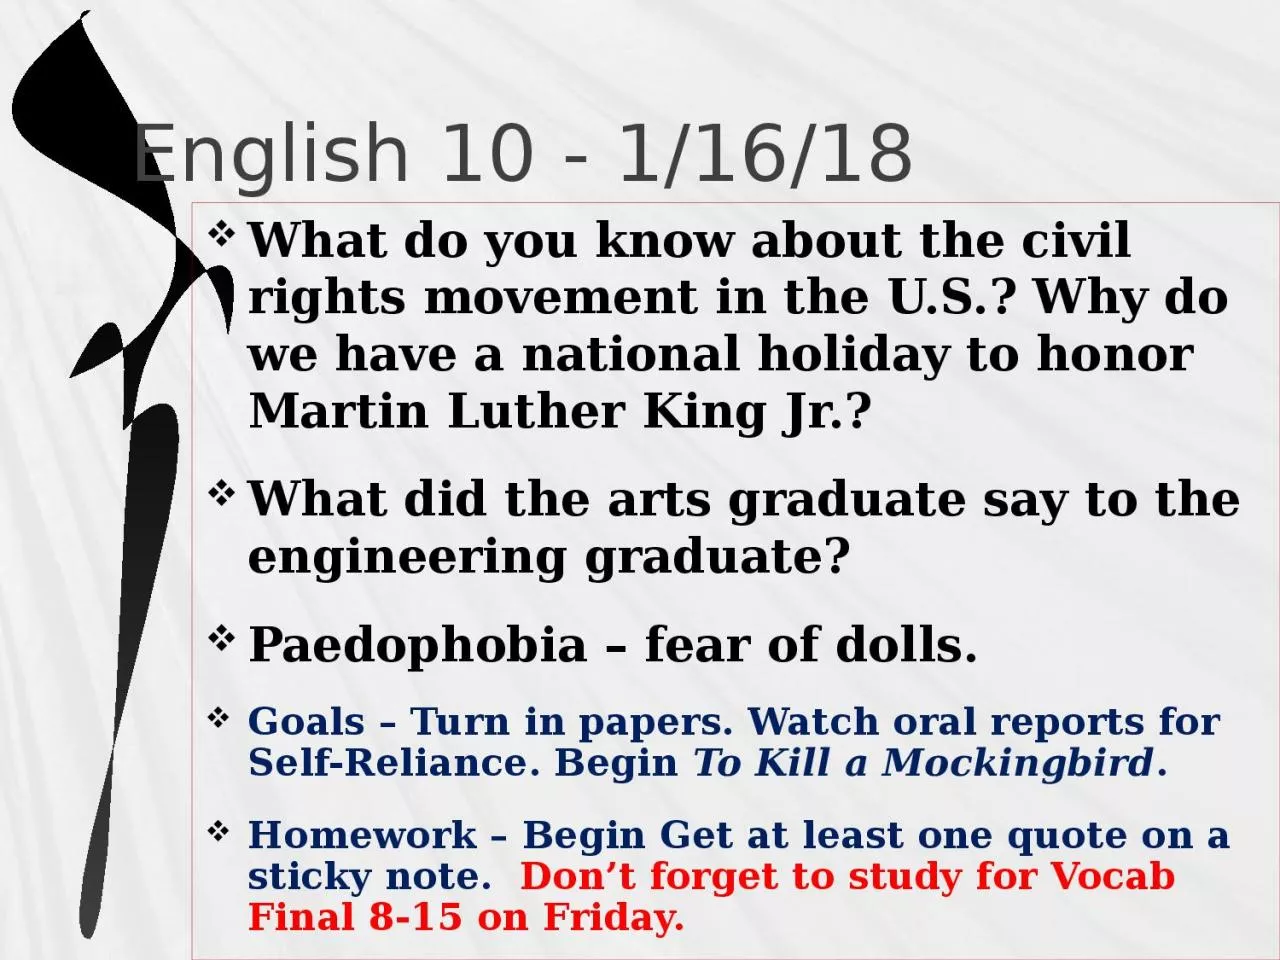 English 10 - 1/16/18 What do you know about the civil rights movement in the U.S.? Why